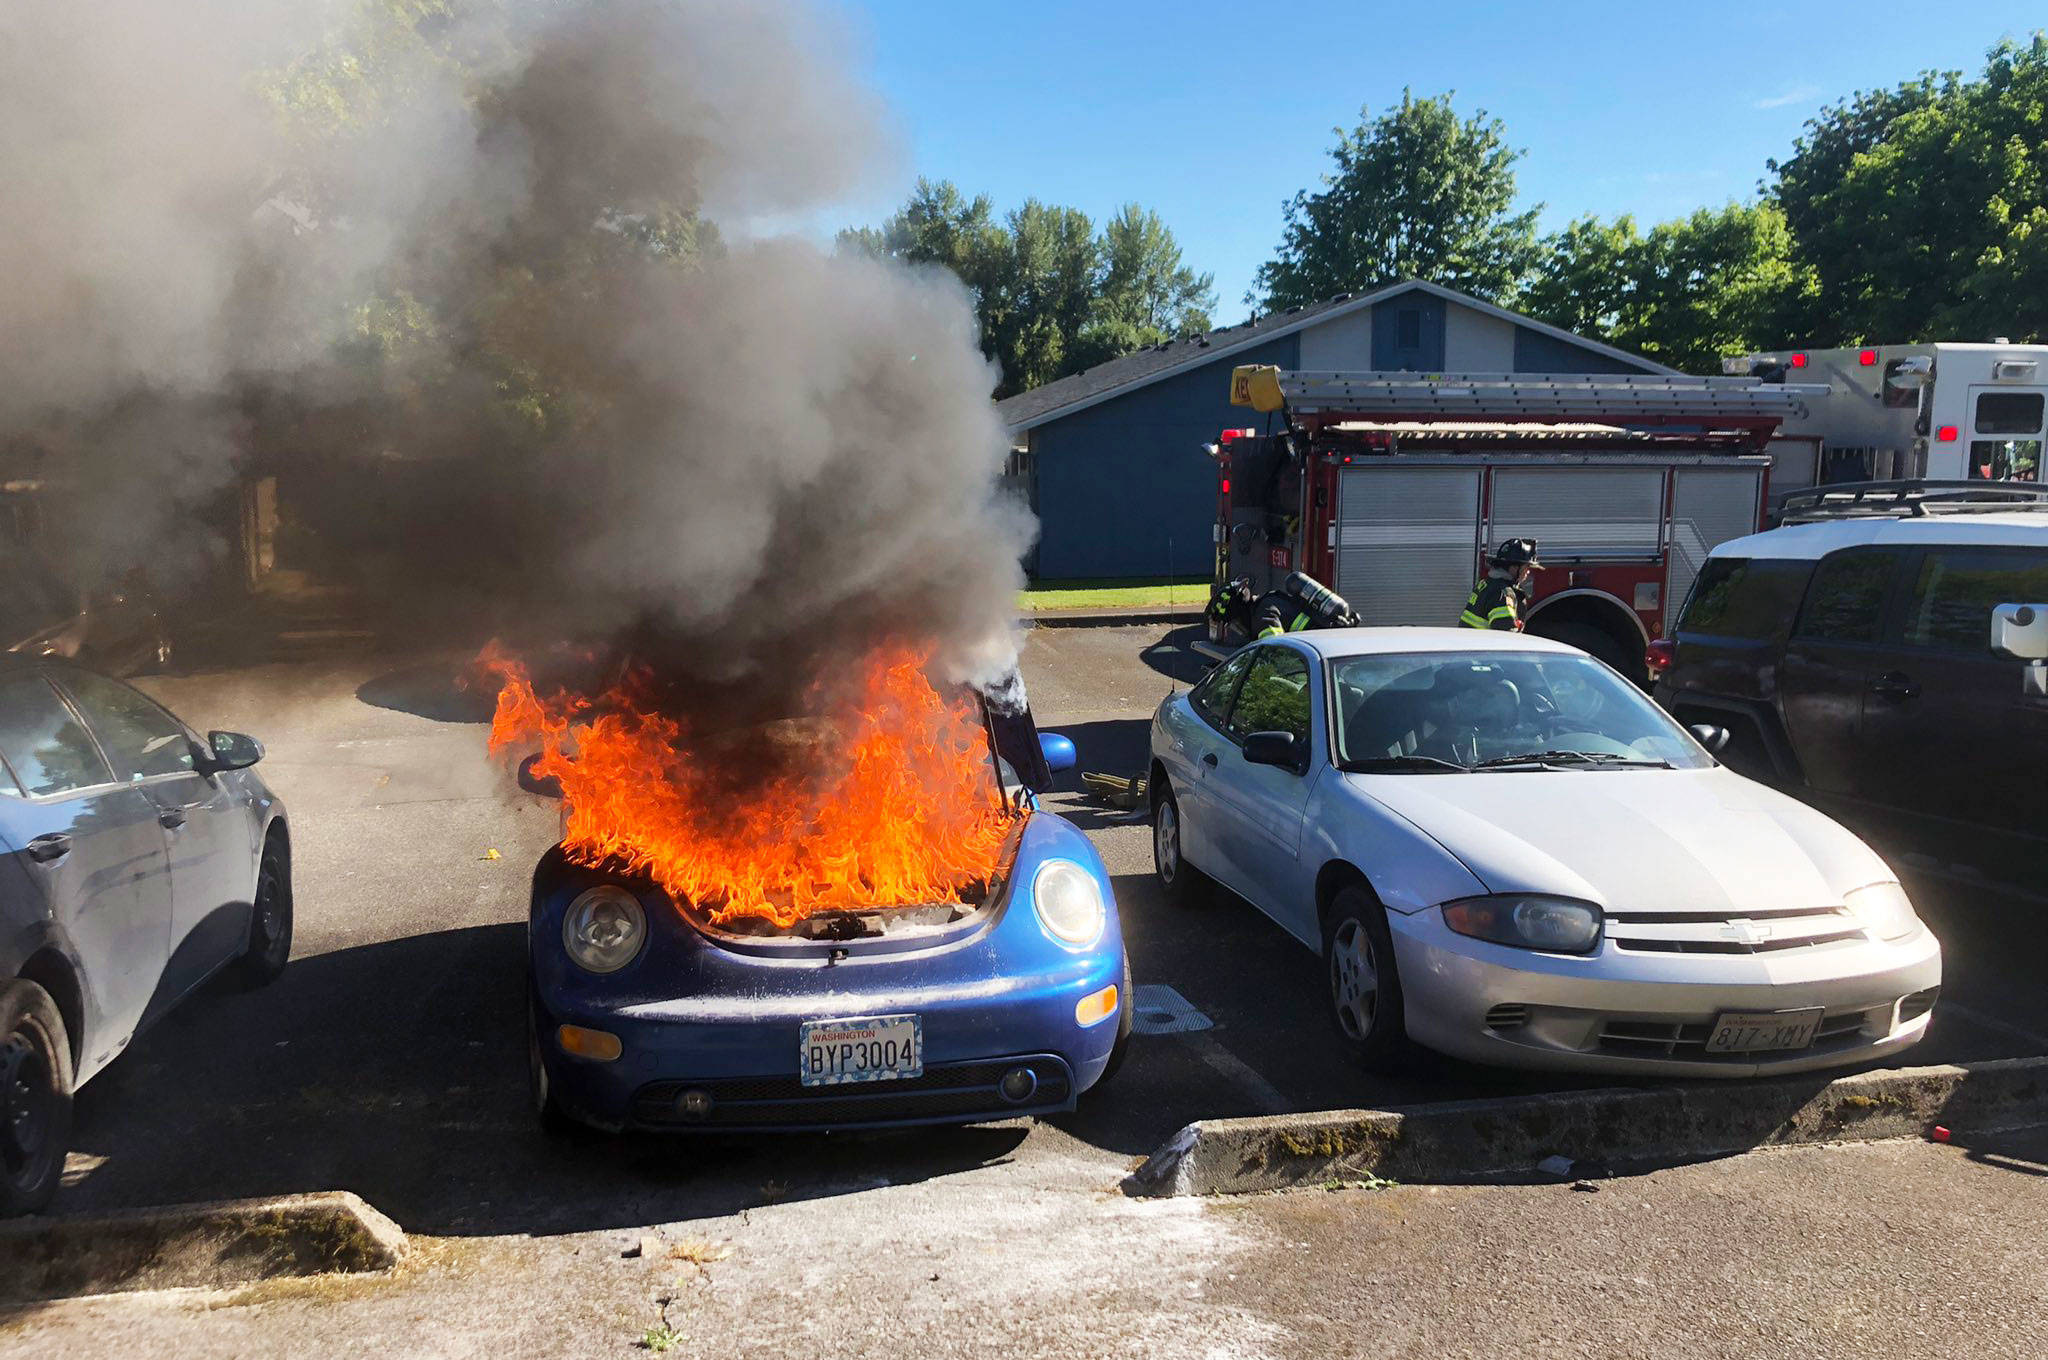 Fire burns a Volkswagen Beetle on Wednesday, June 23 in the 11000 block of SE 220th St., in Kent. Firefighters extinguished the fire before it spread to any other vehicles. COURTESY PHOTO, Puget Sound Fire